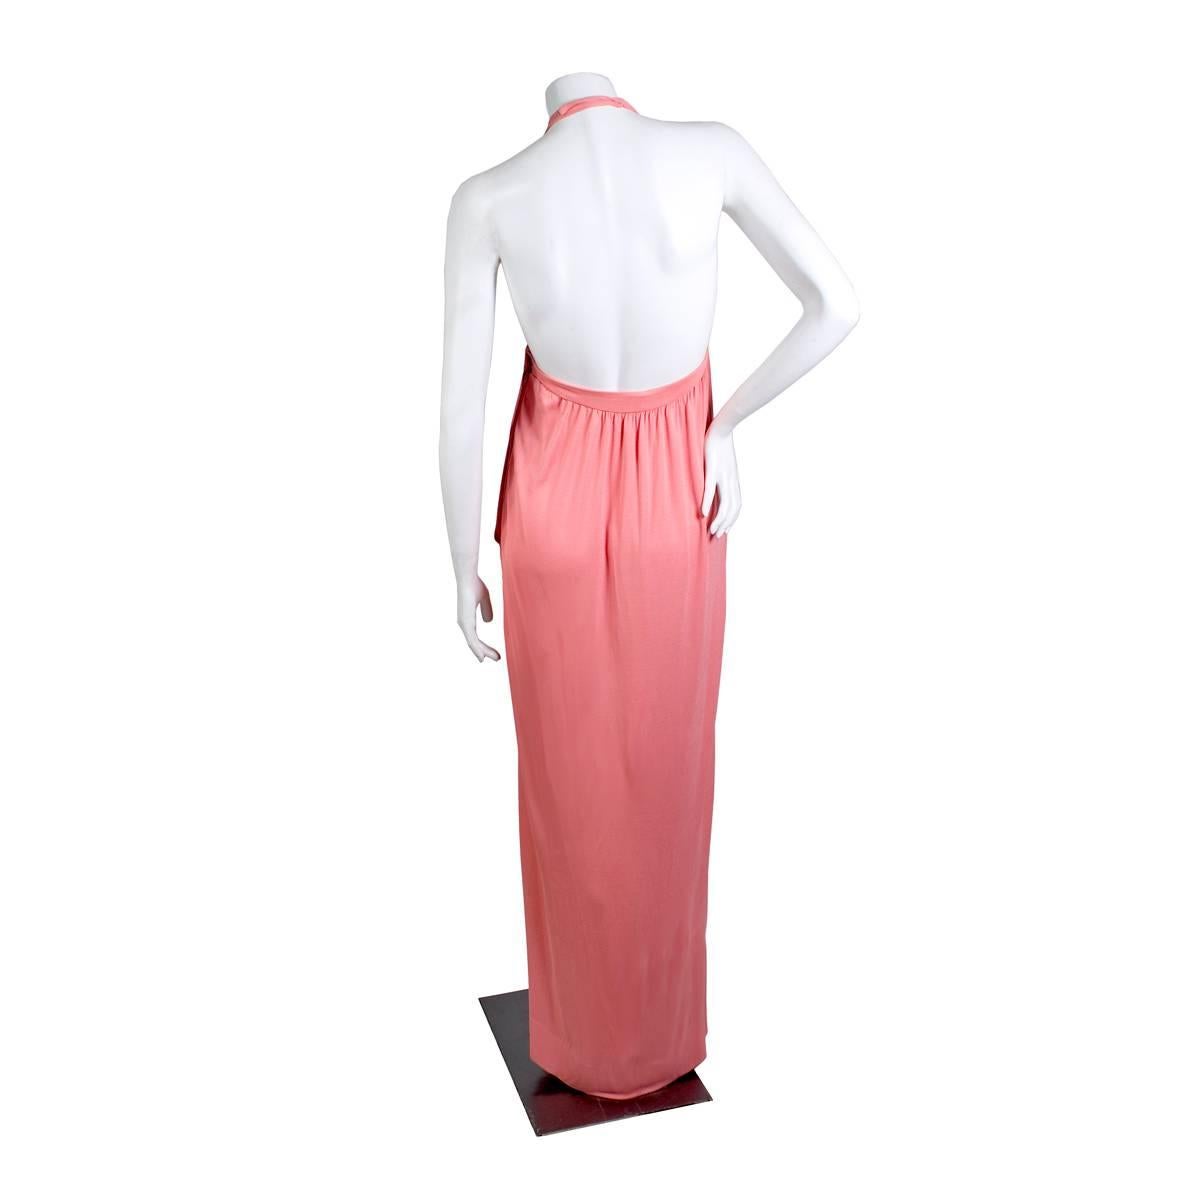 Dress and sweater set by Halston circa 1970s
Double layered light coral pink jersey material
Halter neckline with two hook and eye closures in back of the neck
Includes matching cardigan style sweater with no closures
Condition:  Great vintage